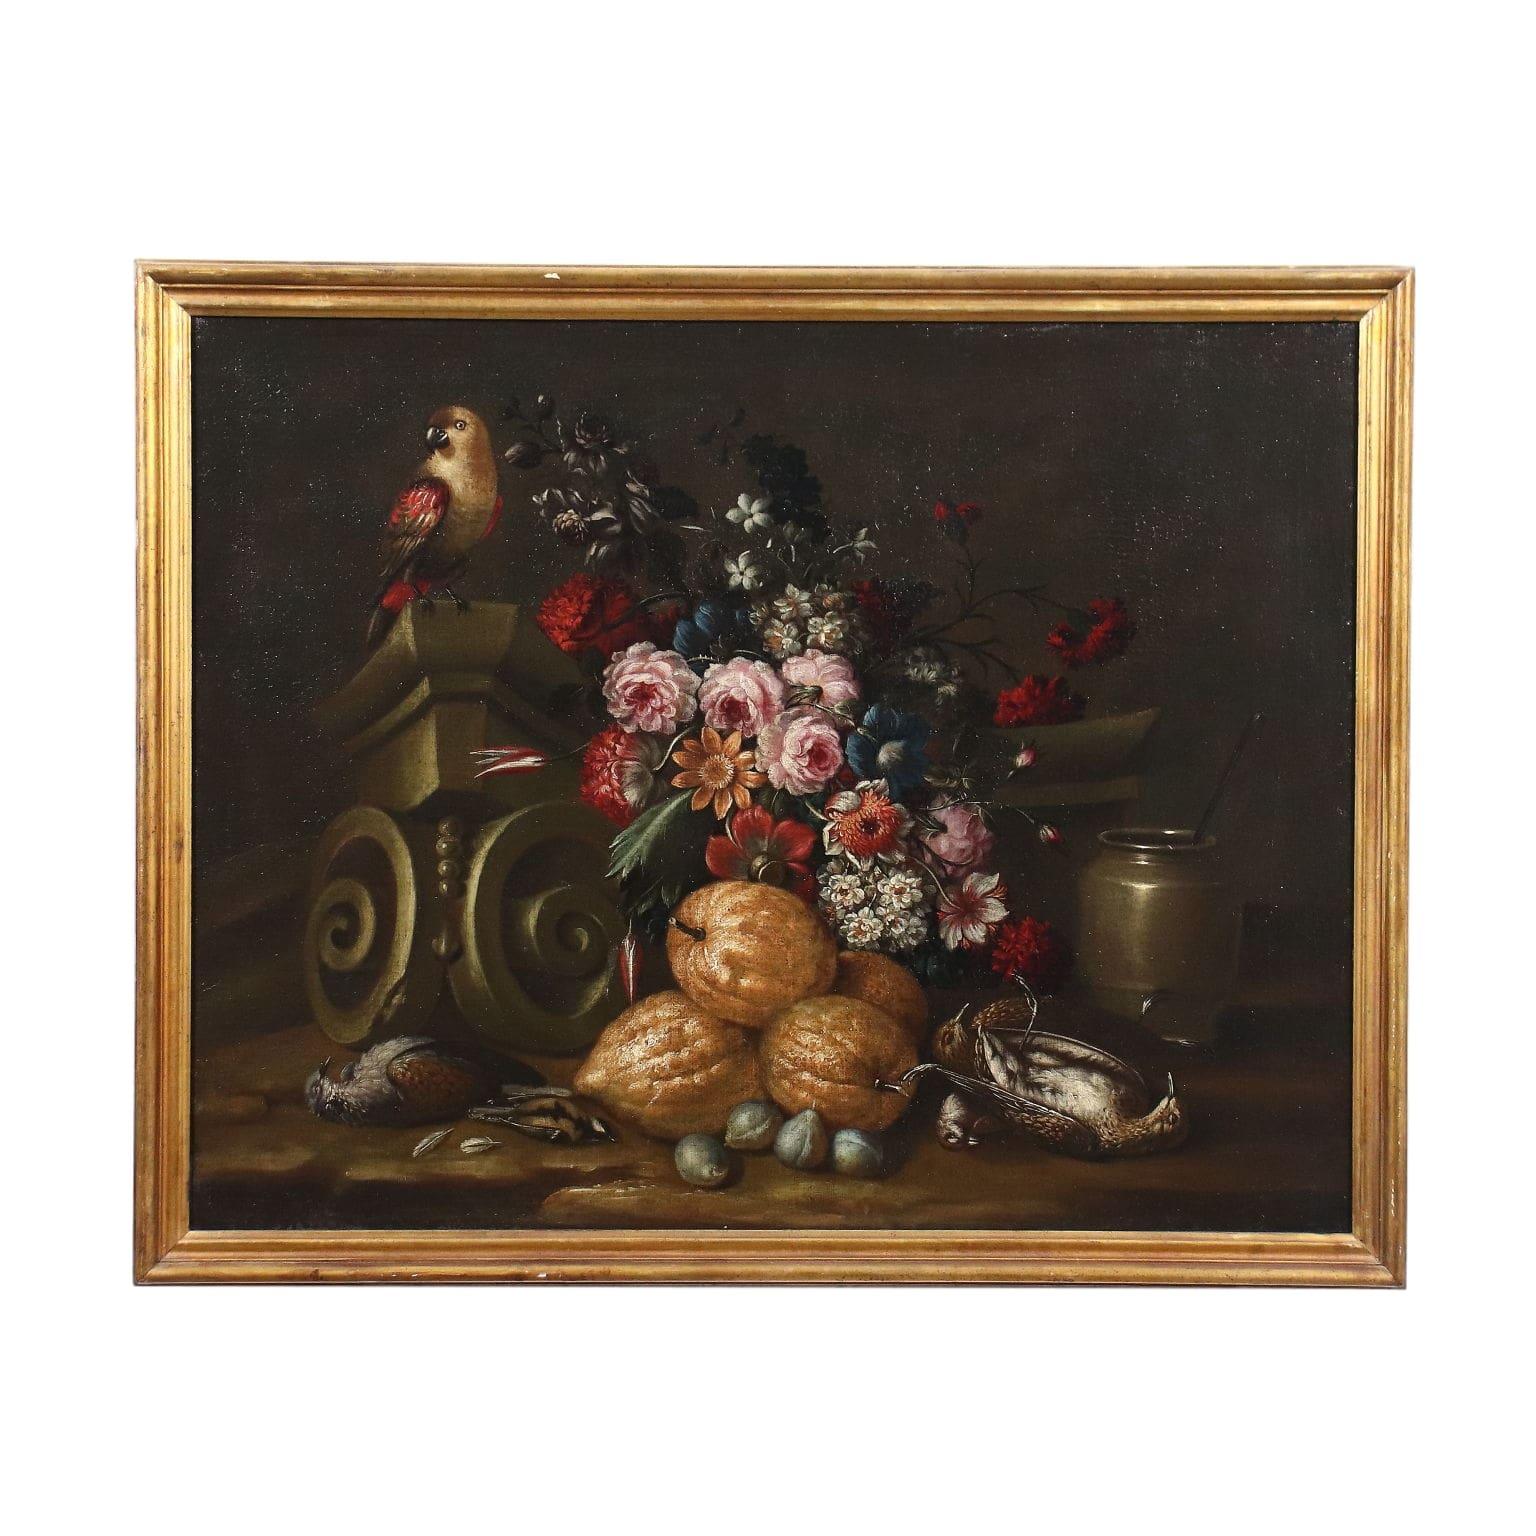 Unknown Still-Life Painting - Still Life with Flowers, Fruits and Animals